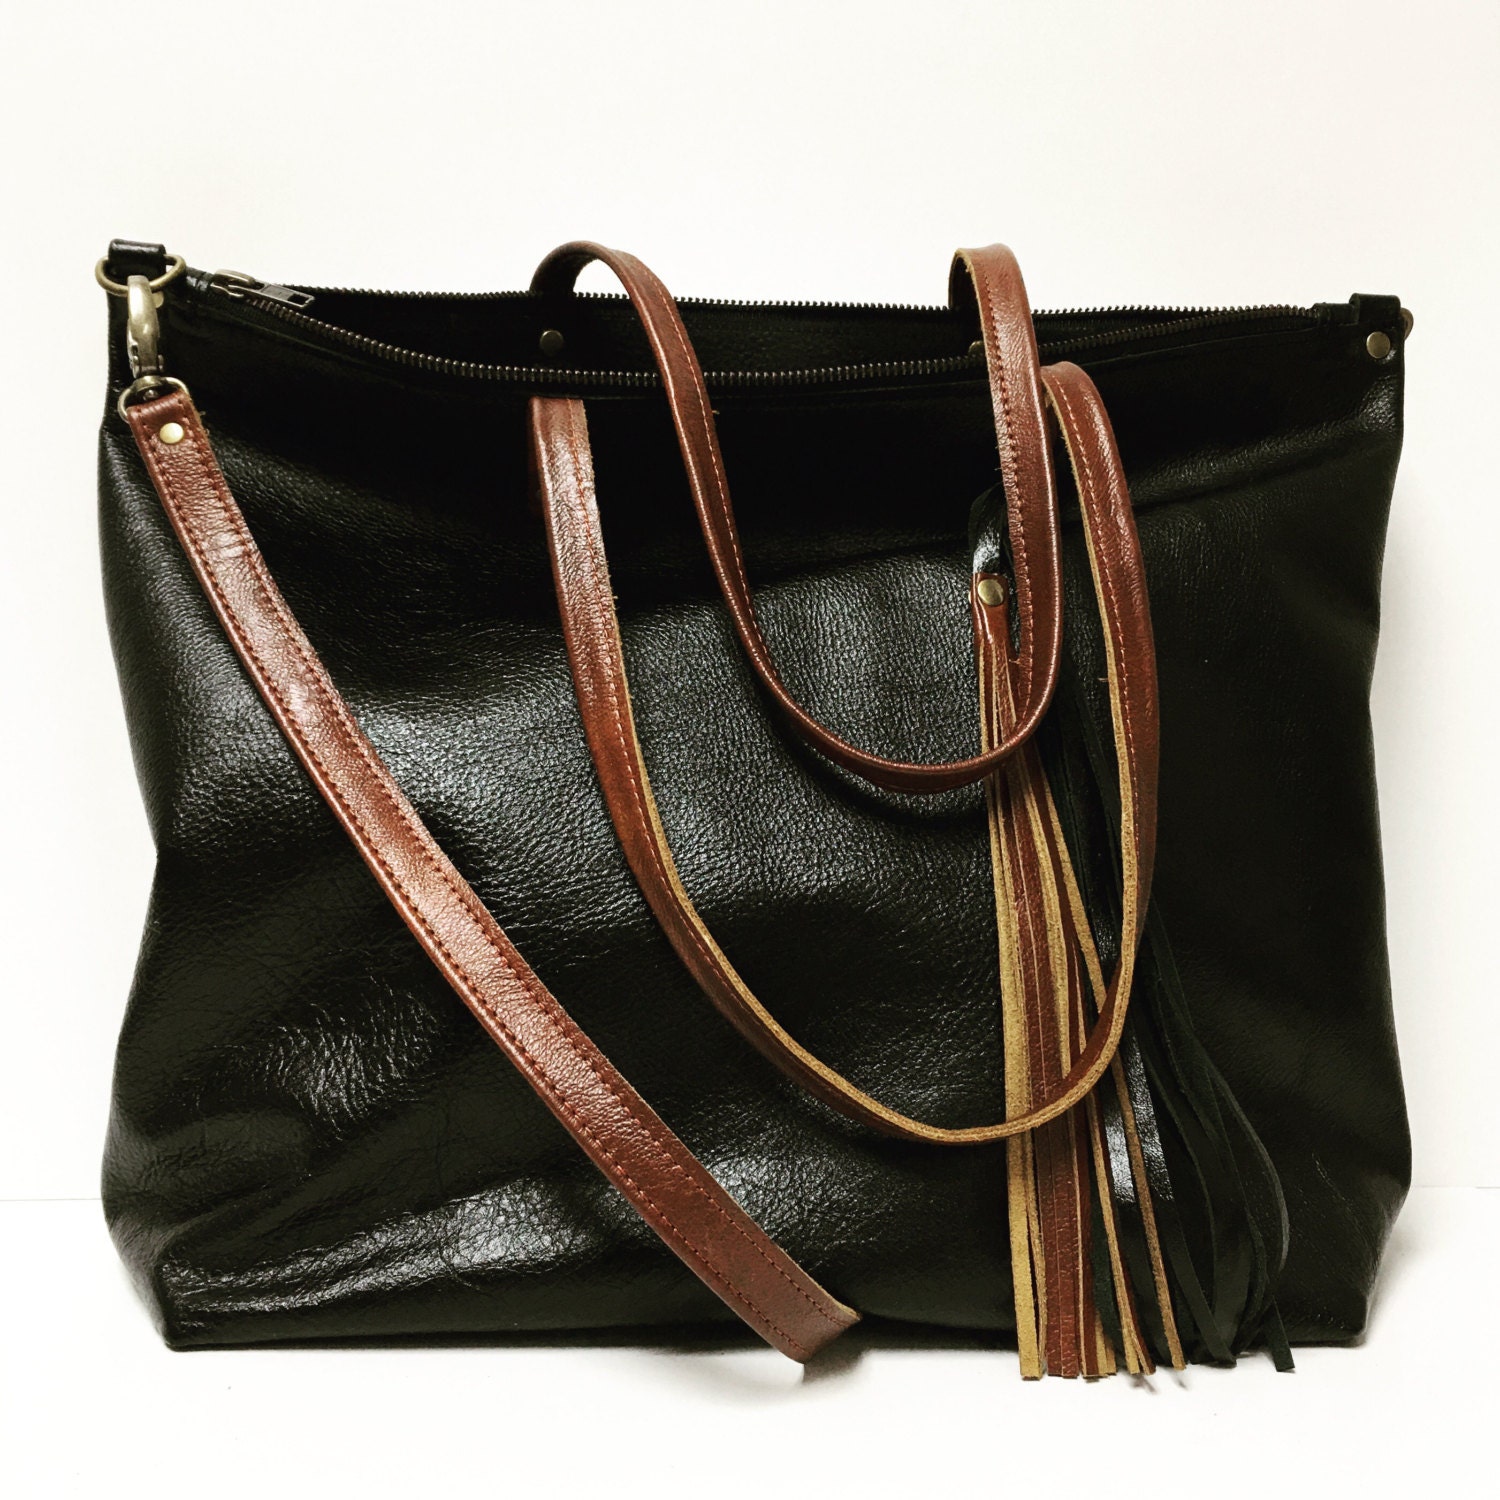 Black and brown leather tote bag with cross body strap